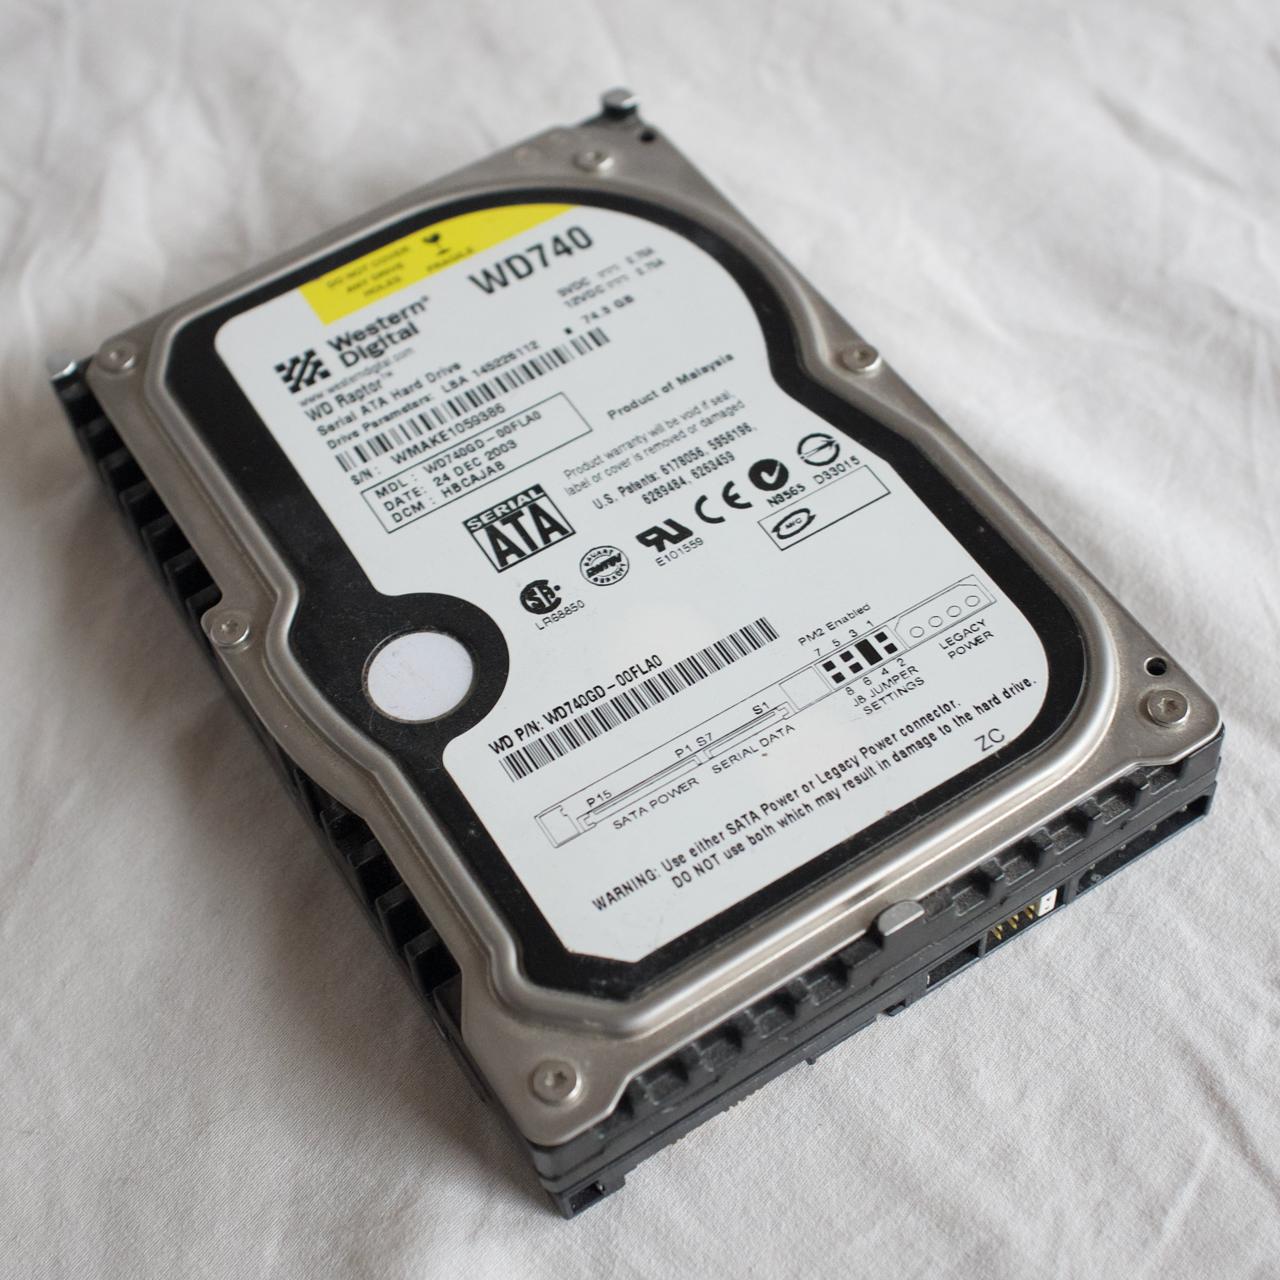 Wholesale crucial mx500 Of All Sizes For Long Term Data Storage 